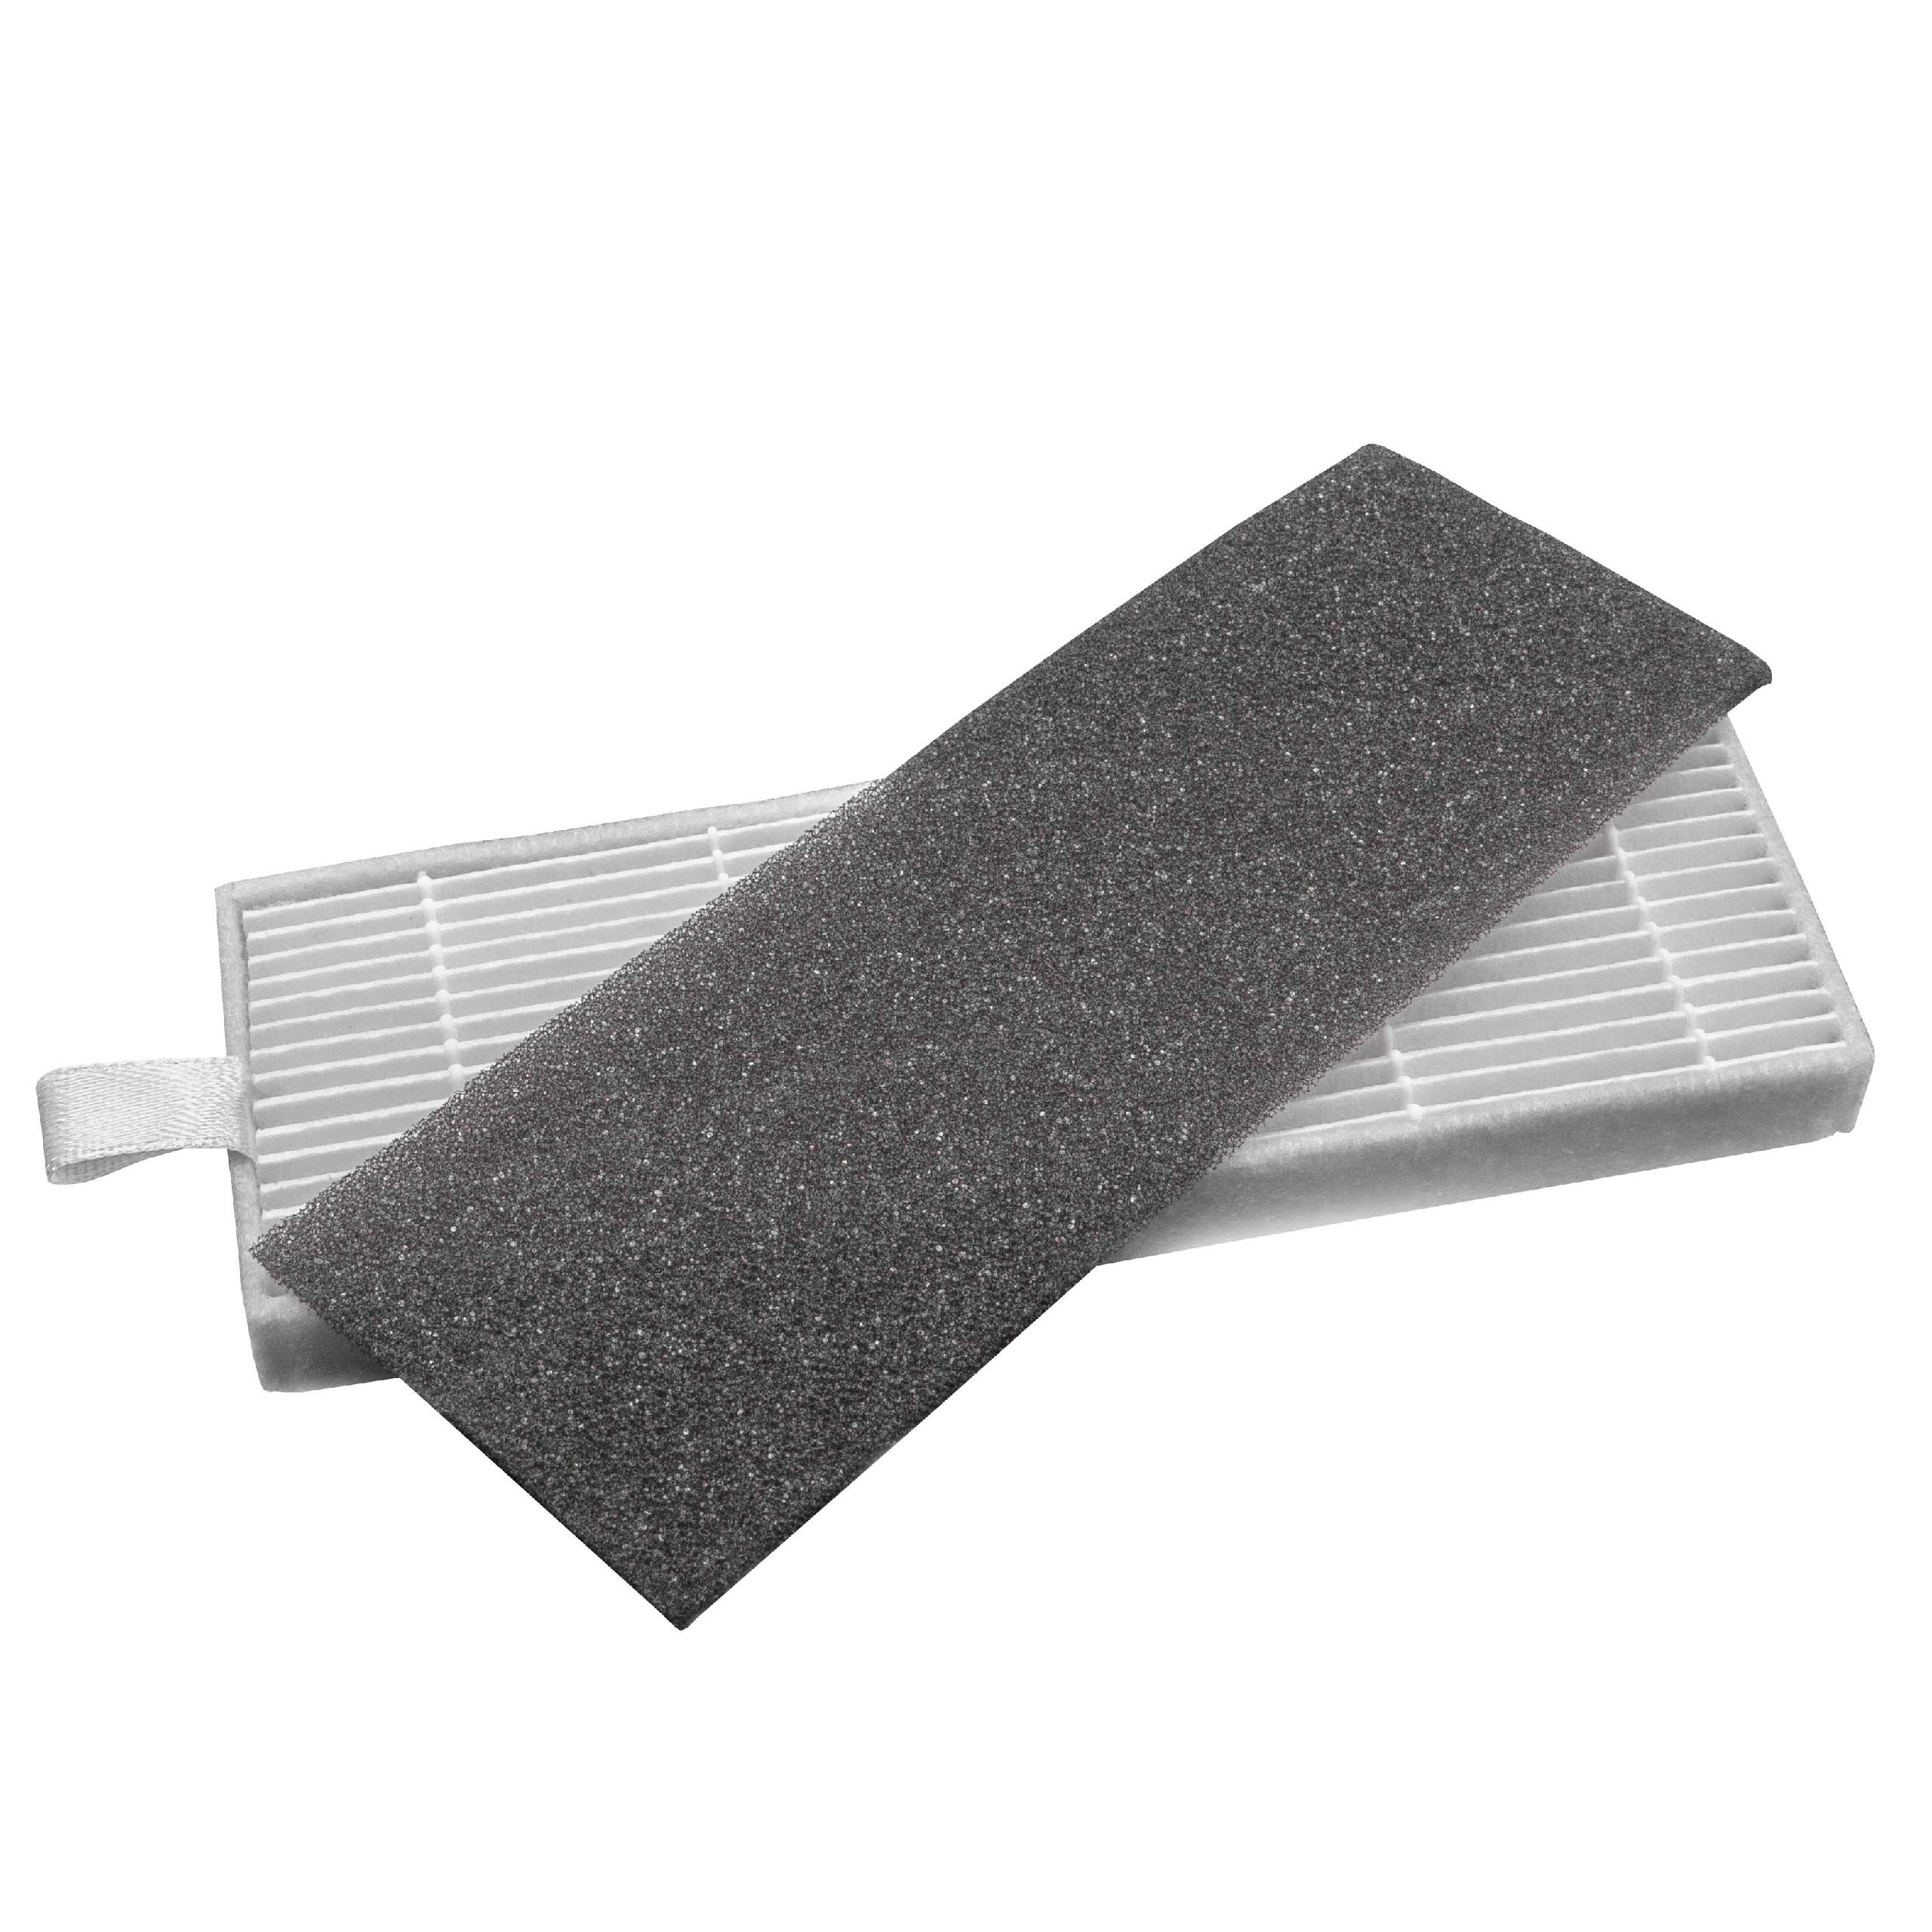 2x HEPA filter / foam filter suitable for A4 iLife, Zaco A4 Vacuum Cleaner